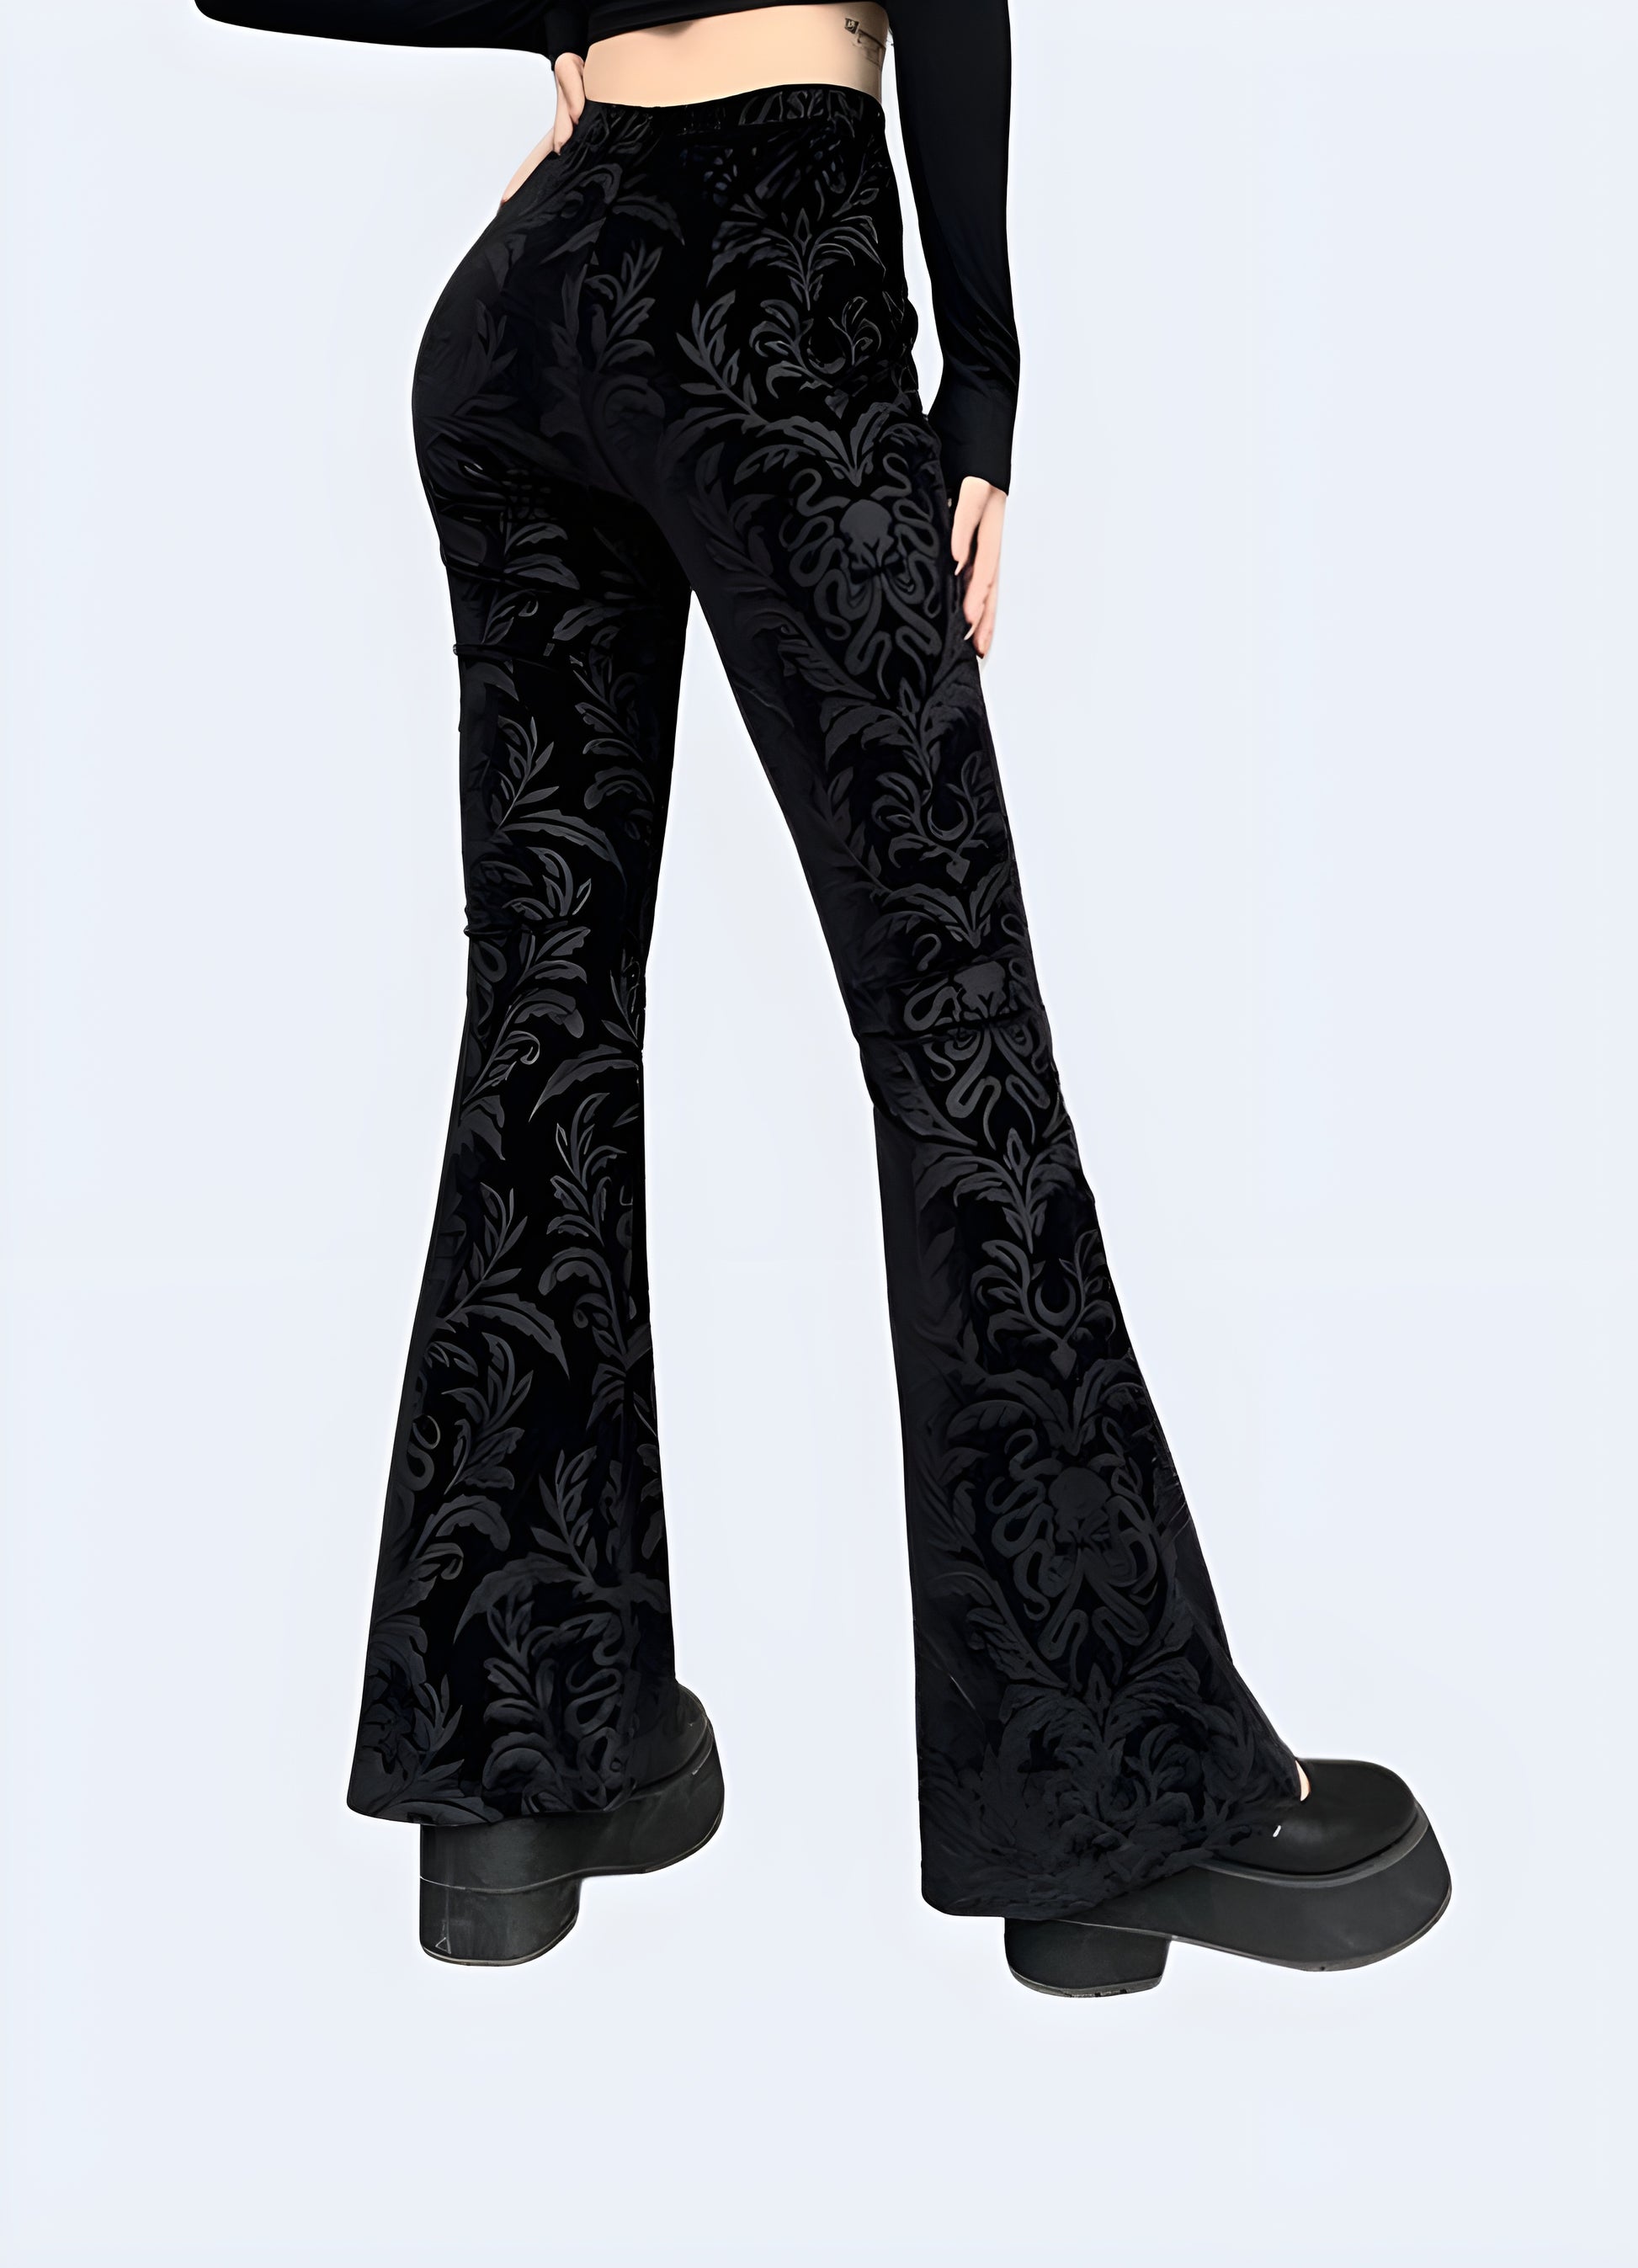 Women's parachute pants in soft, breathable fabric. Perfect for lounging or casual wear.